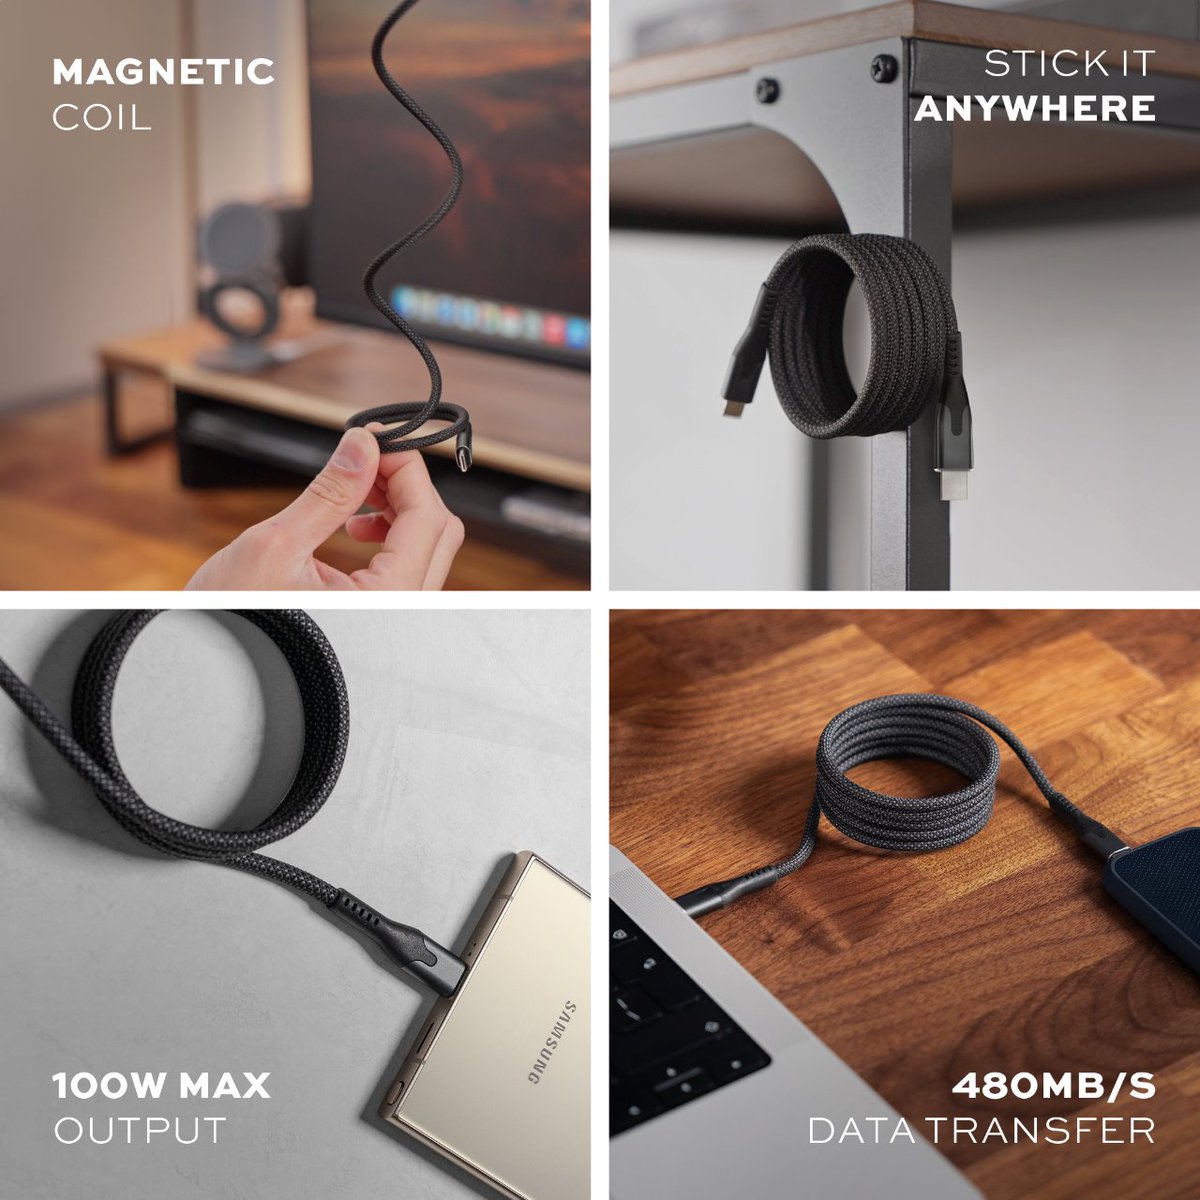 Meet Your New Favorite Cable 🧲 MagStack

Tired of tangled cables? Meet the charging cable that organizes itself.

Perfect for any setup, from your desk to your car ⚡

Grab yours before it sells out: statikco.com/products/magst…

#MagStack #TechTrends #NewTech #TechLaunch #StatikFam